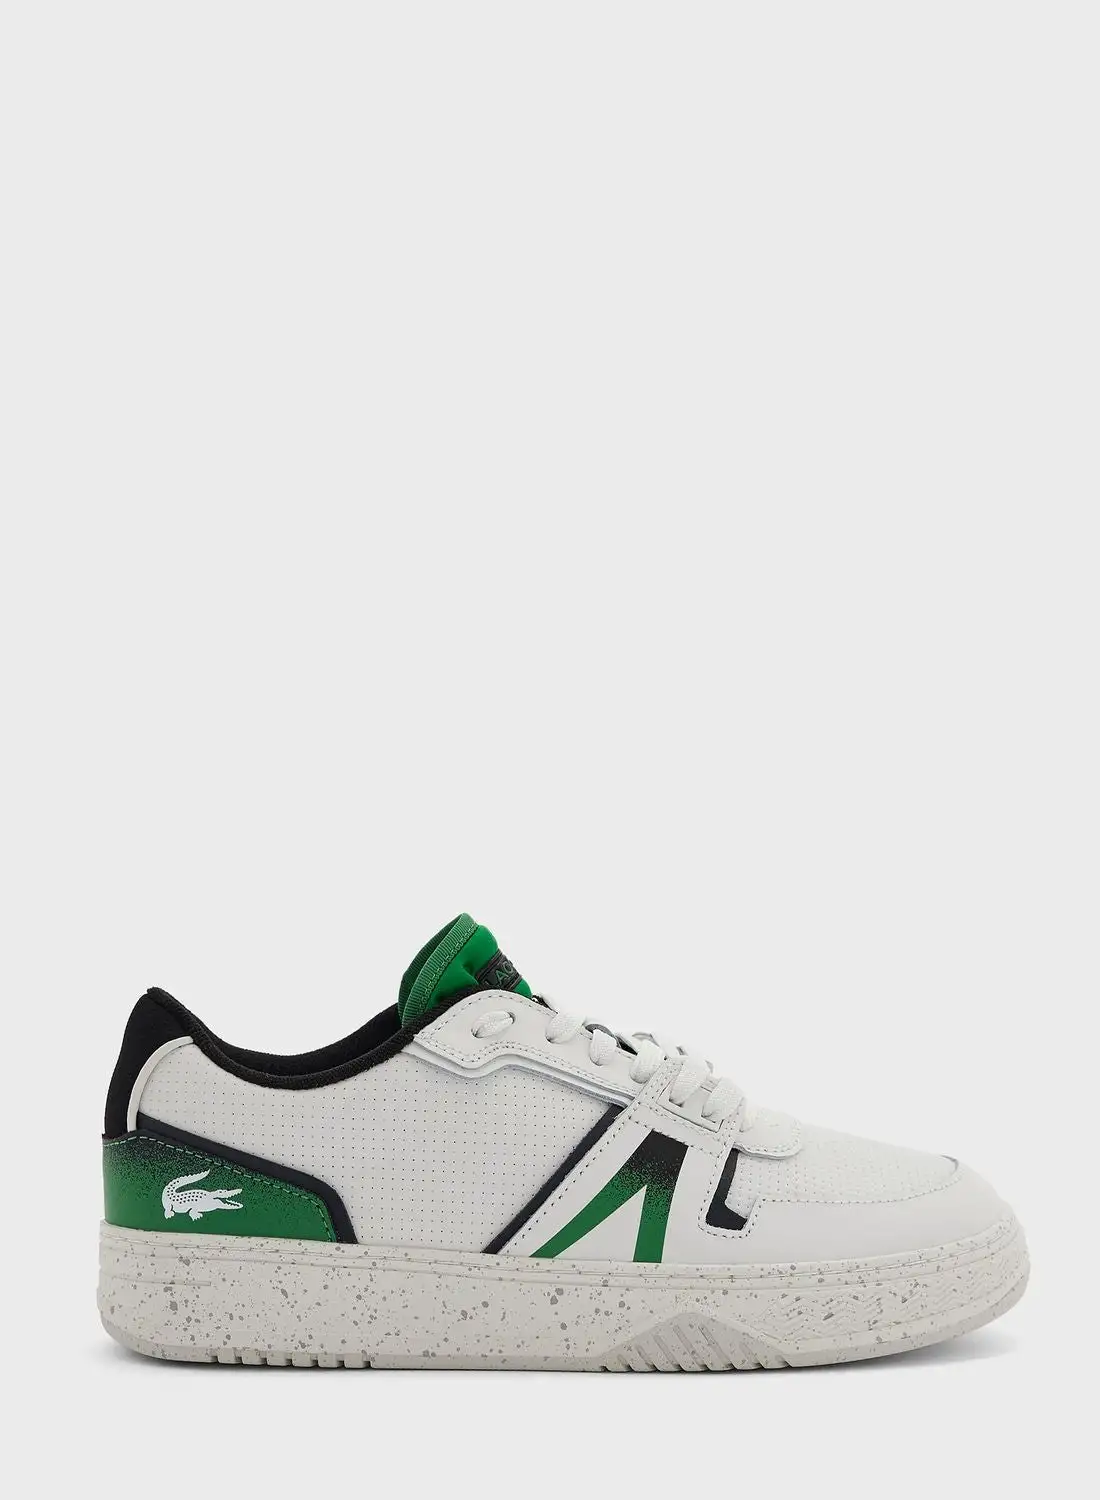 LACOSTE Caual Lace Up Sneakers